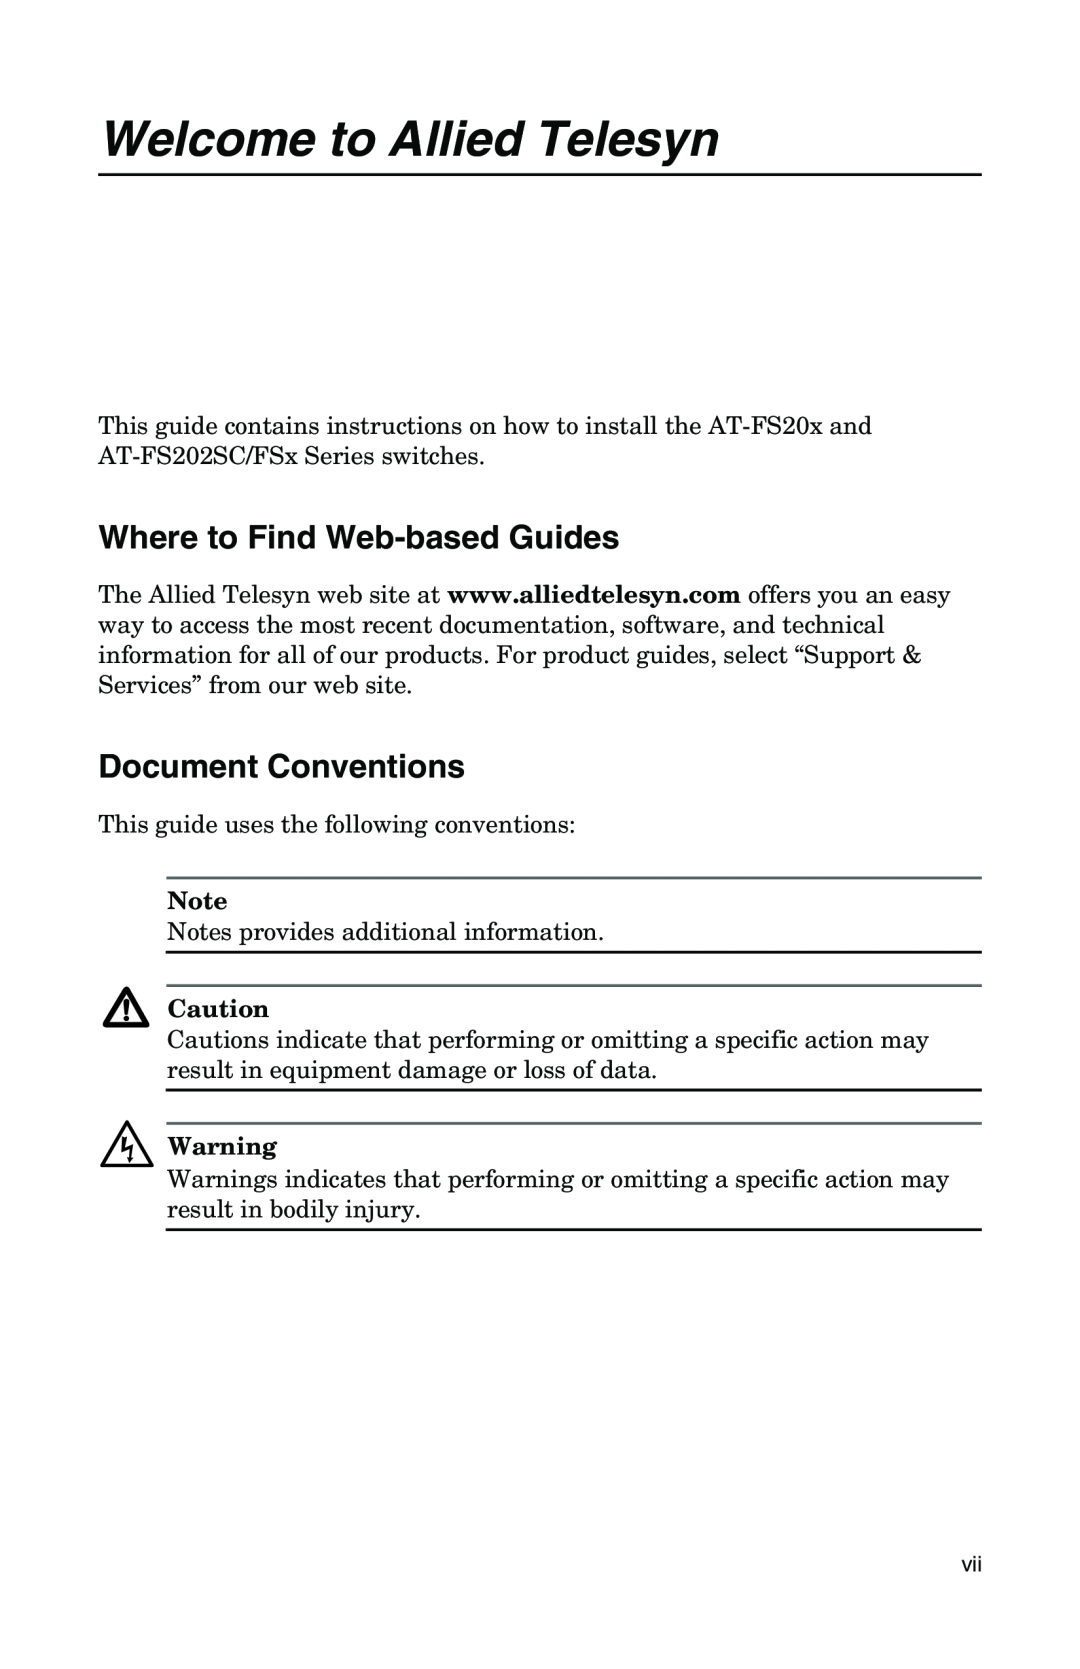 IBM AT-FS202SC/FS4, AT-FS202SC/FS2 manual Welcome to Allied Telesyn, Where to Find Web-based Guides, Document Conventions 